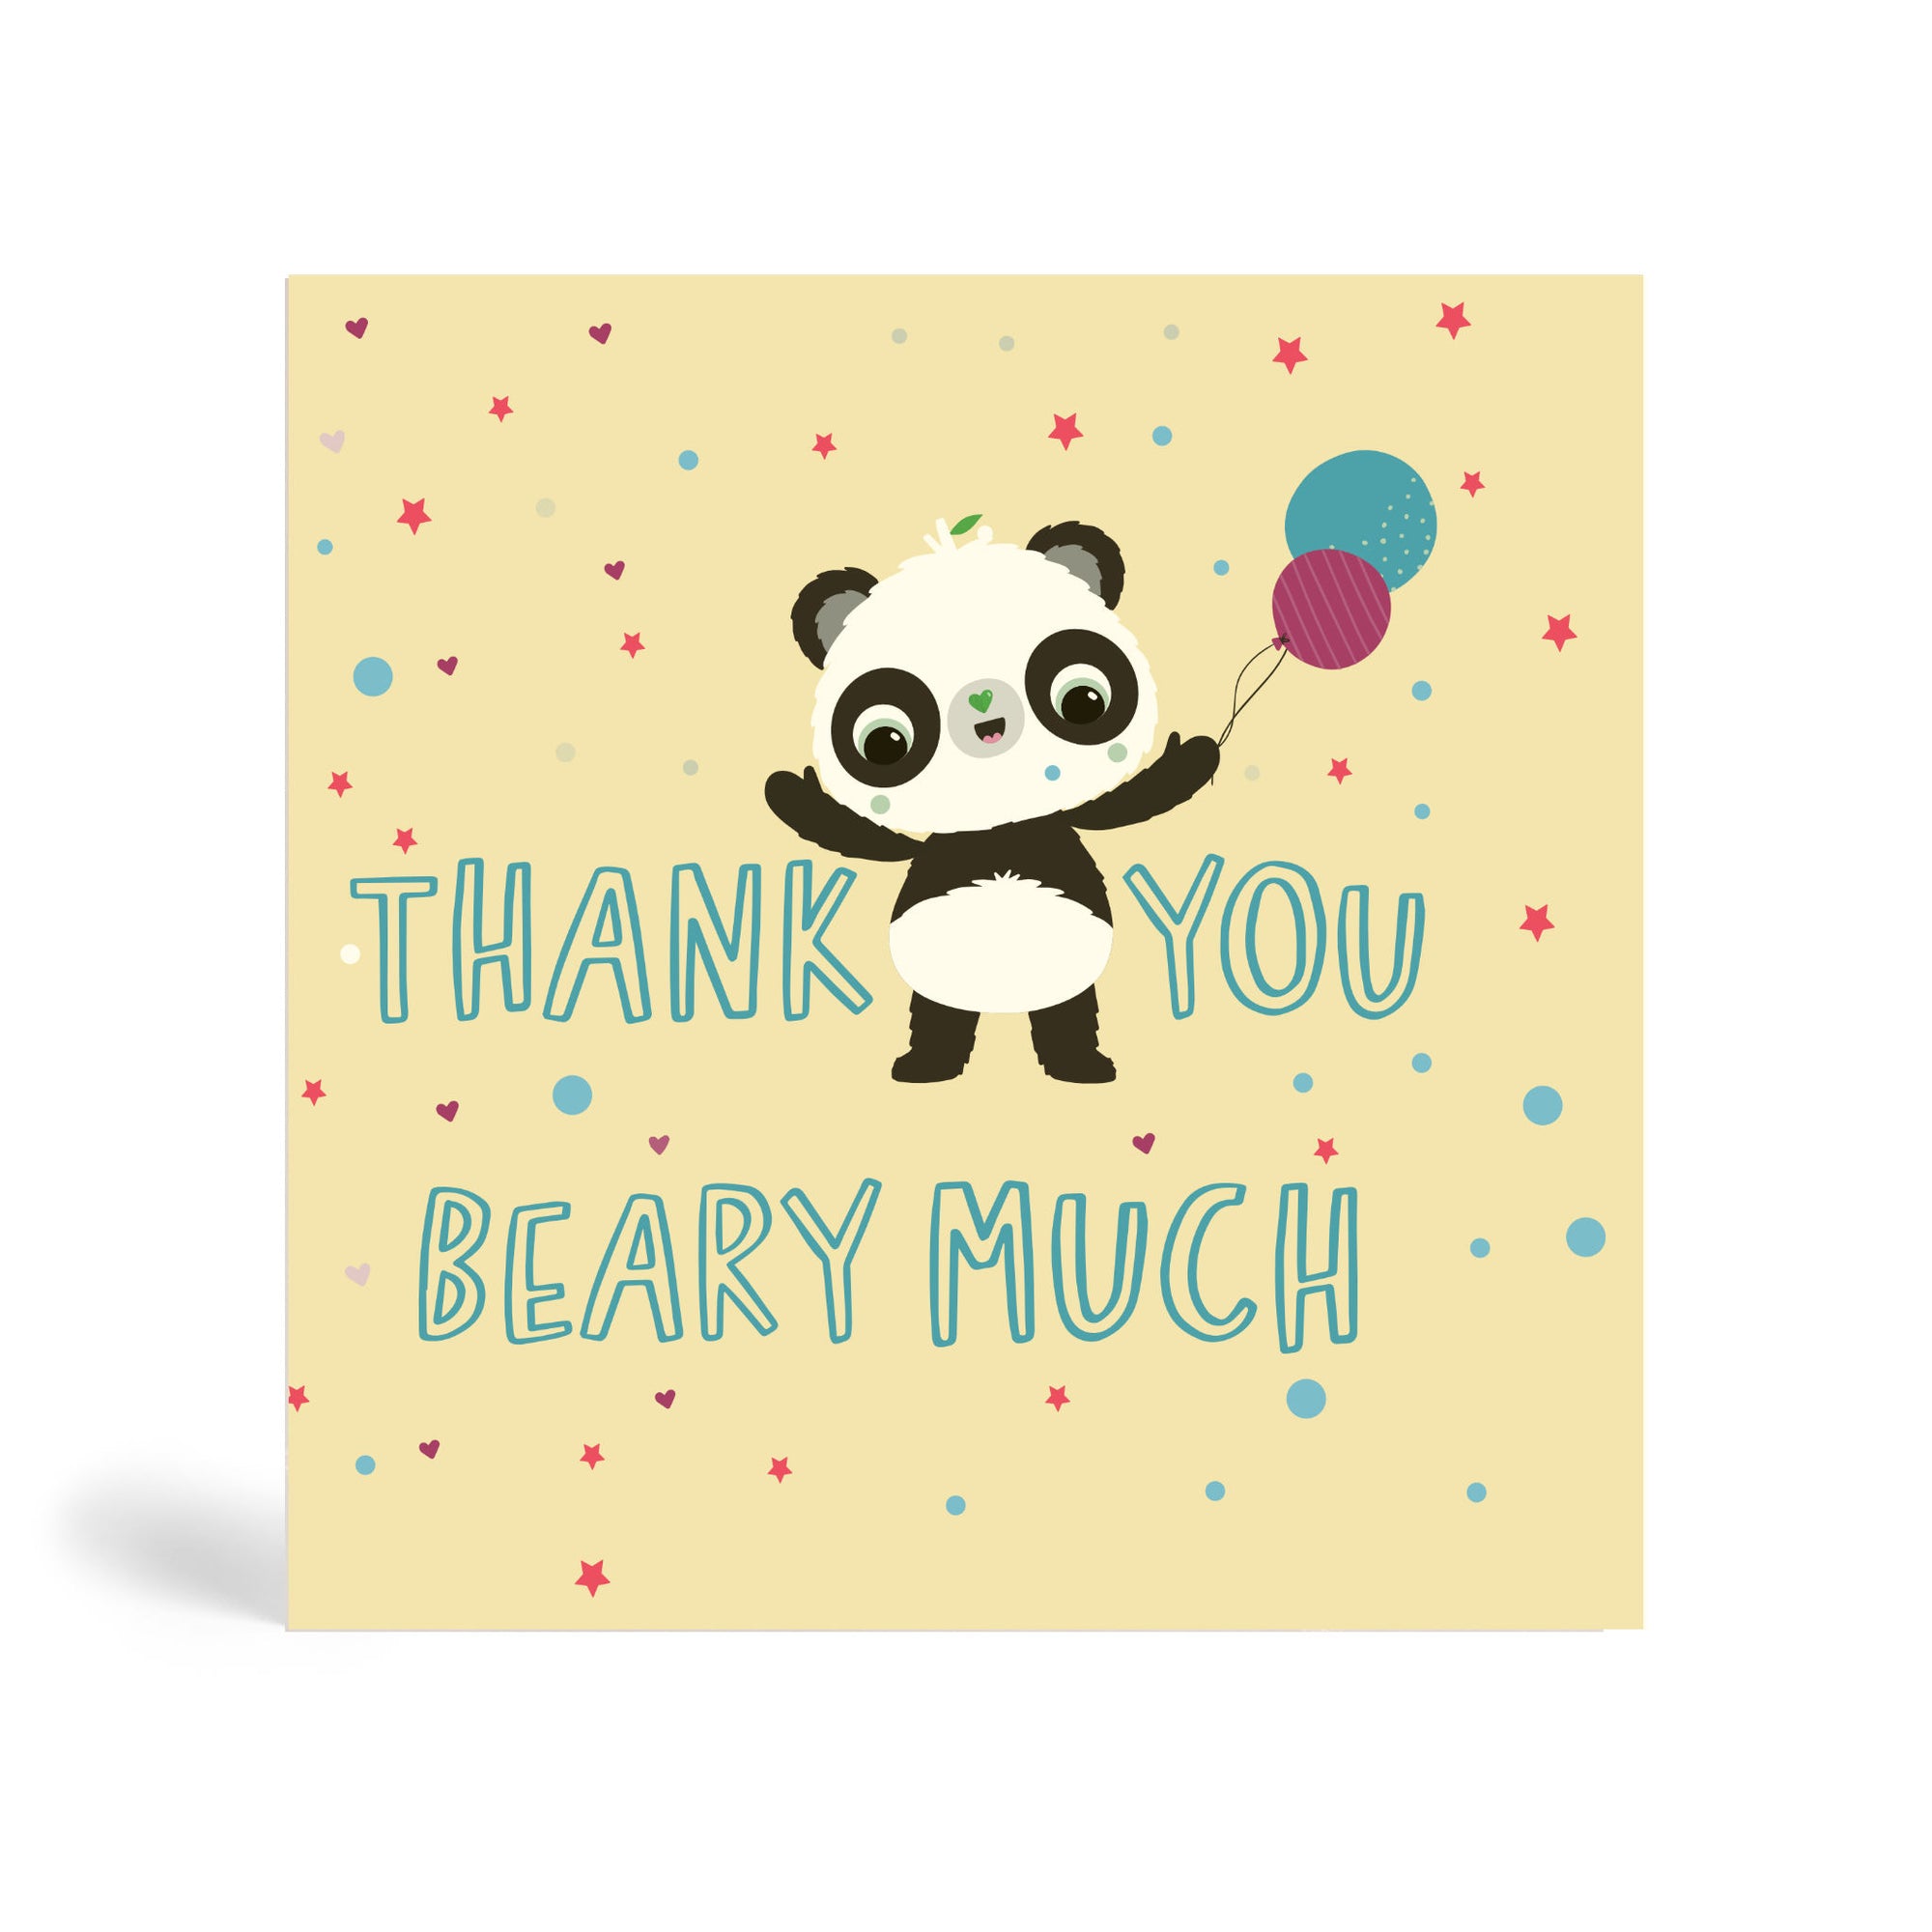 Cream 150mm square eco-friendly, tree free thank you greeting card with Panda holding a purple and green balloon with different colour stars, circles and heart shape in the background. The cards say, thank you Beary Much. Panda Joy UK, environmentally friendly greeting cards.